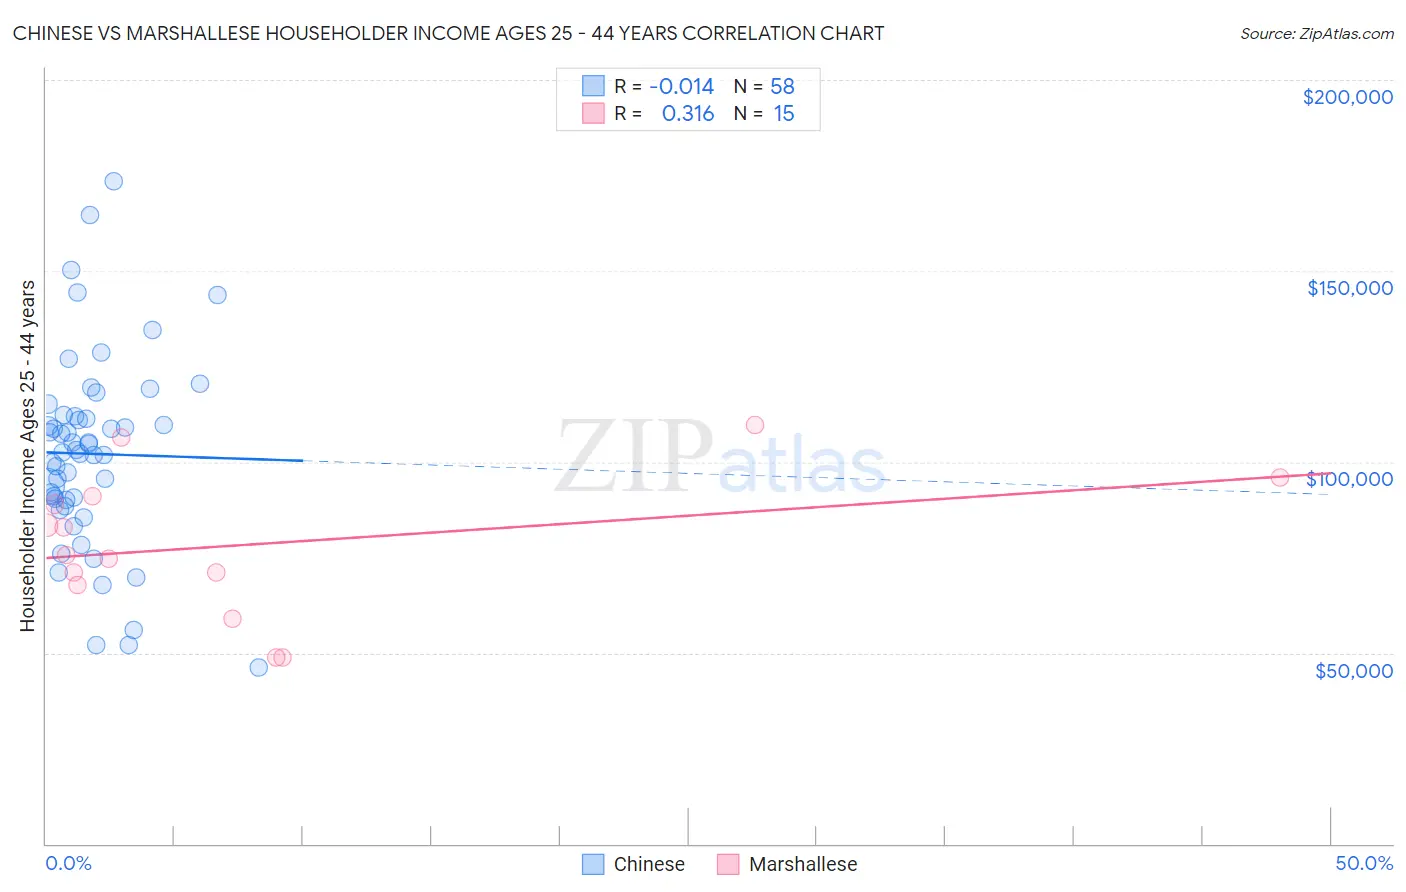 Chinese vs Marshallese Householder Income Ages 25 - 44 years